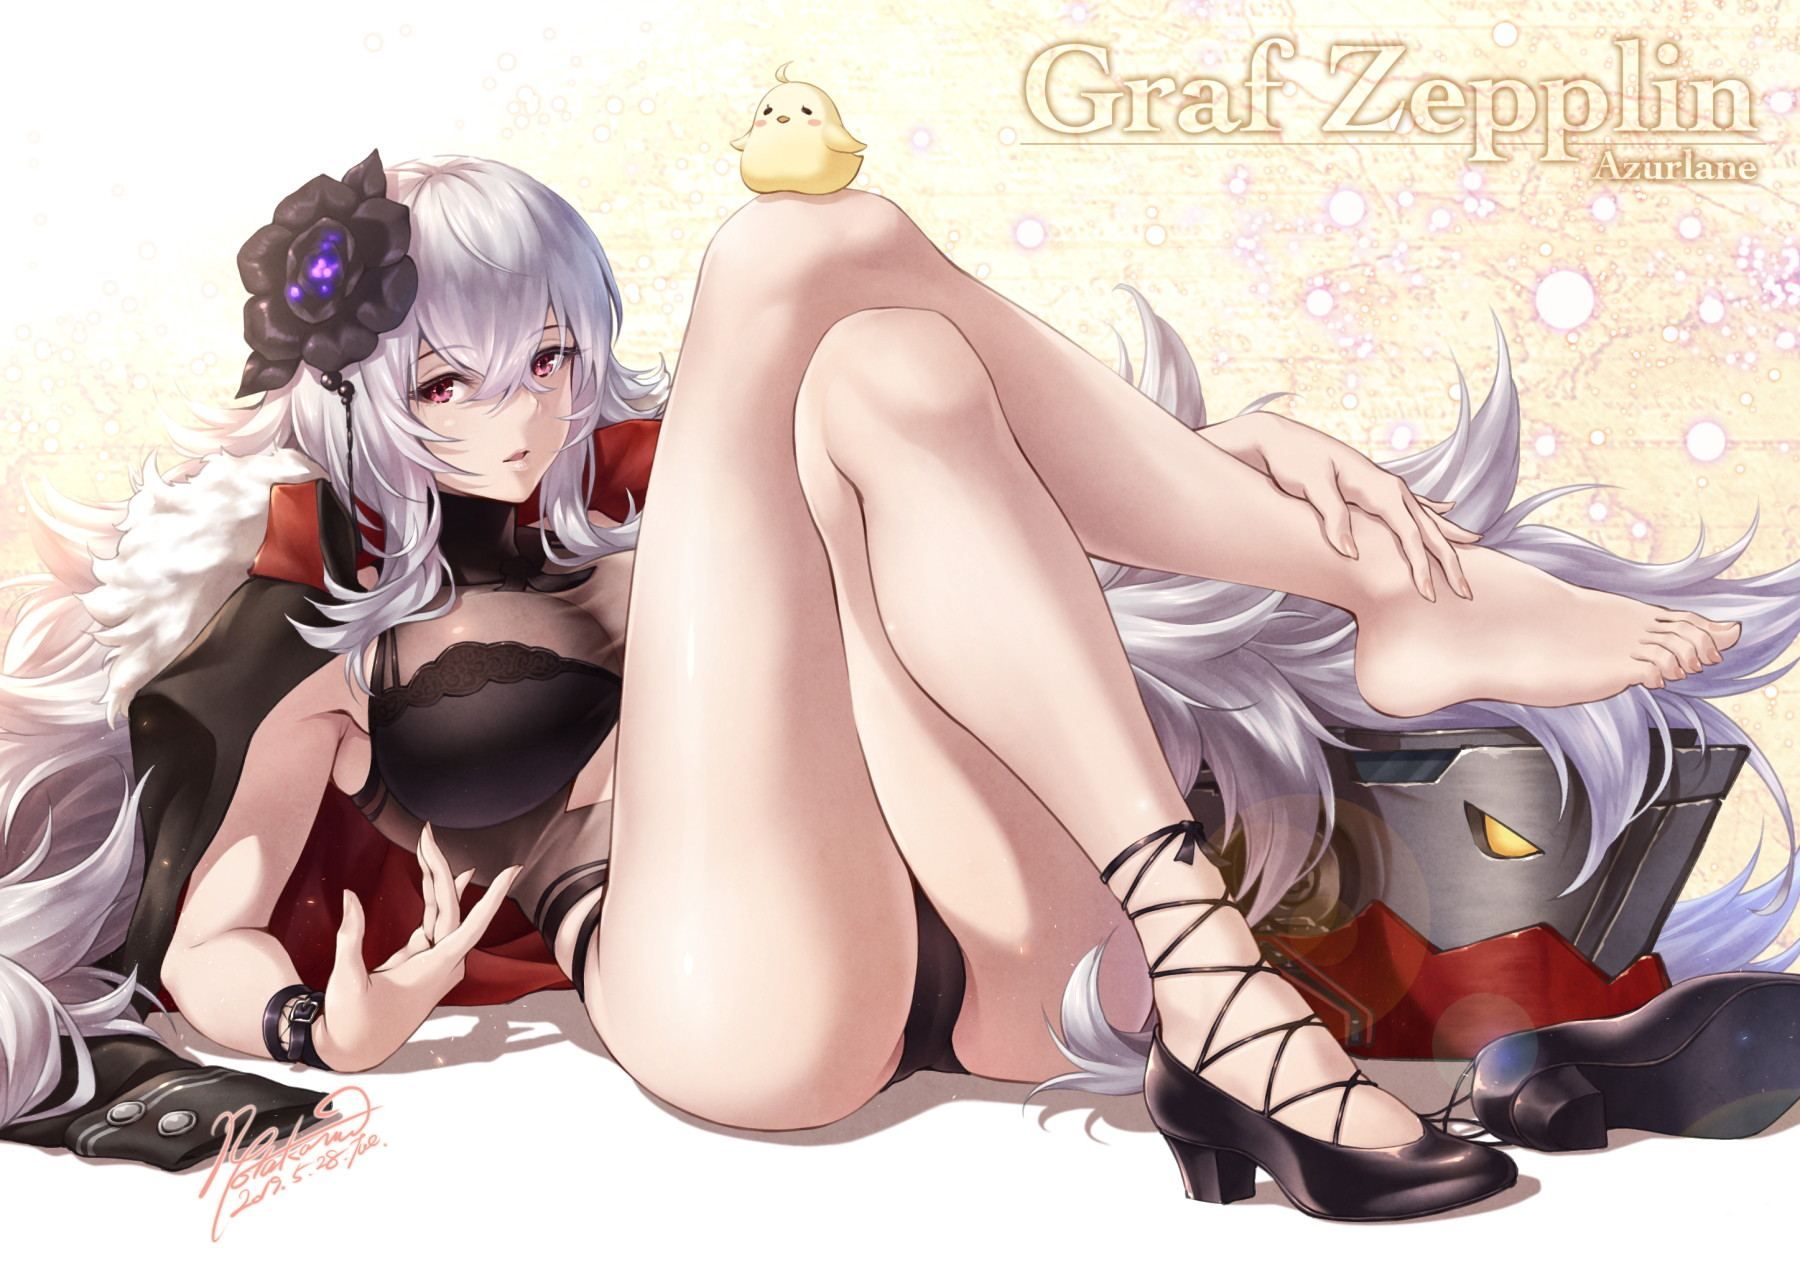 Cute two-dimensional image of Azur Lane. 14